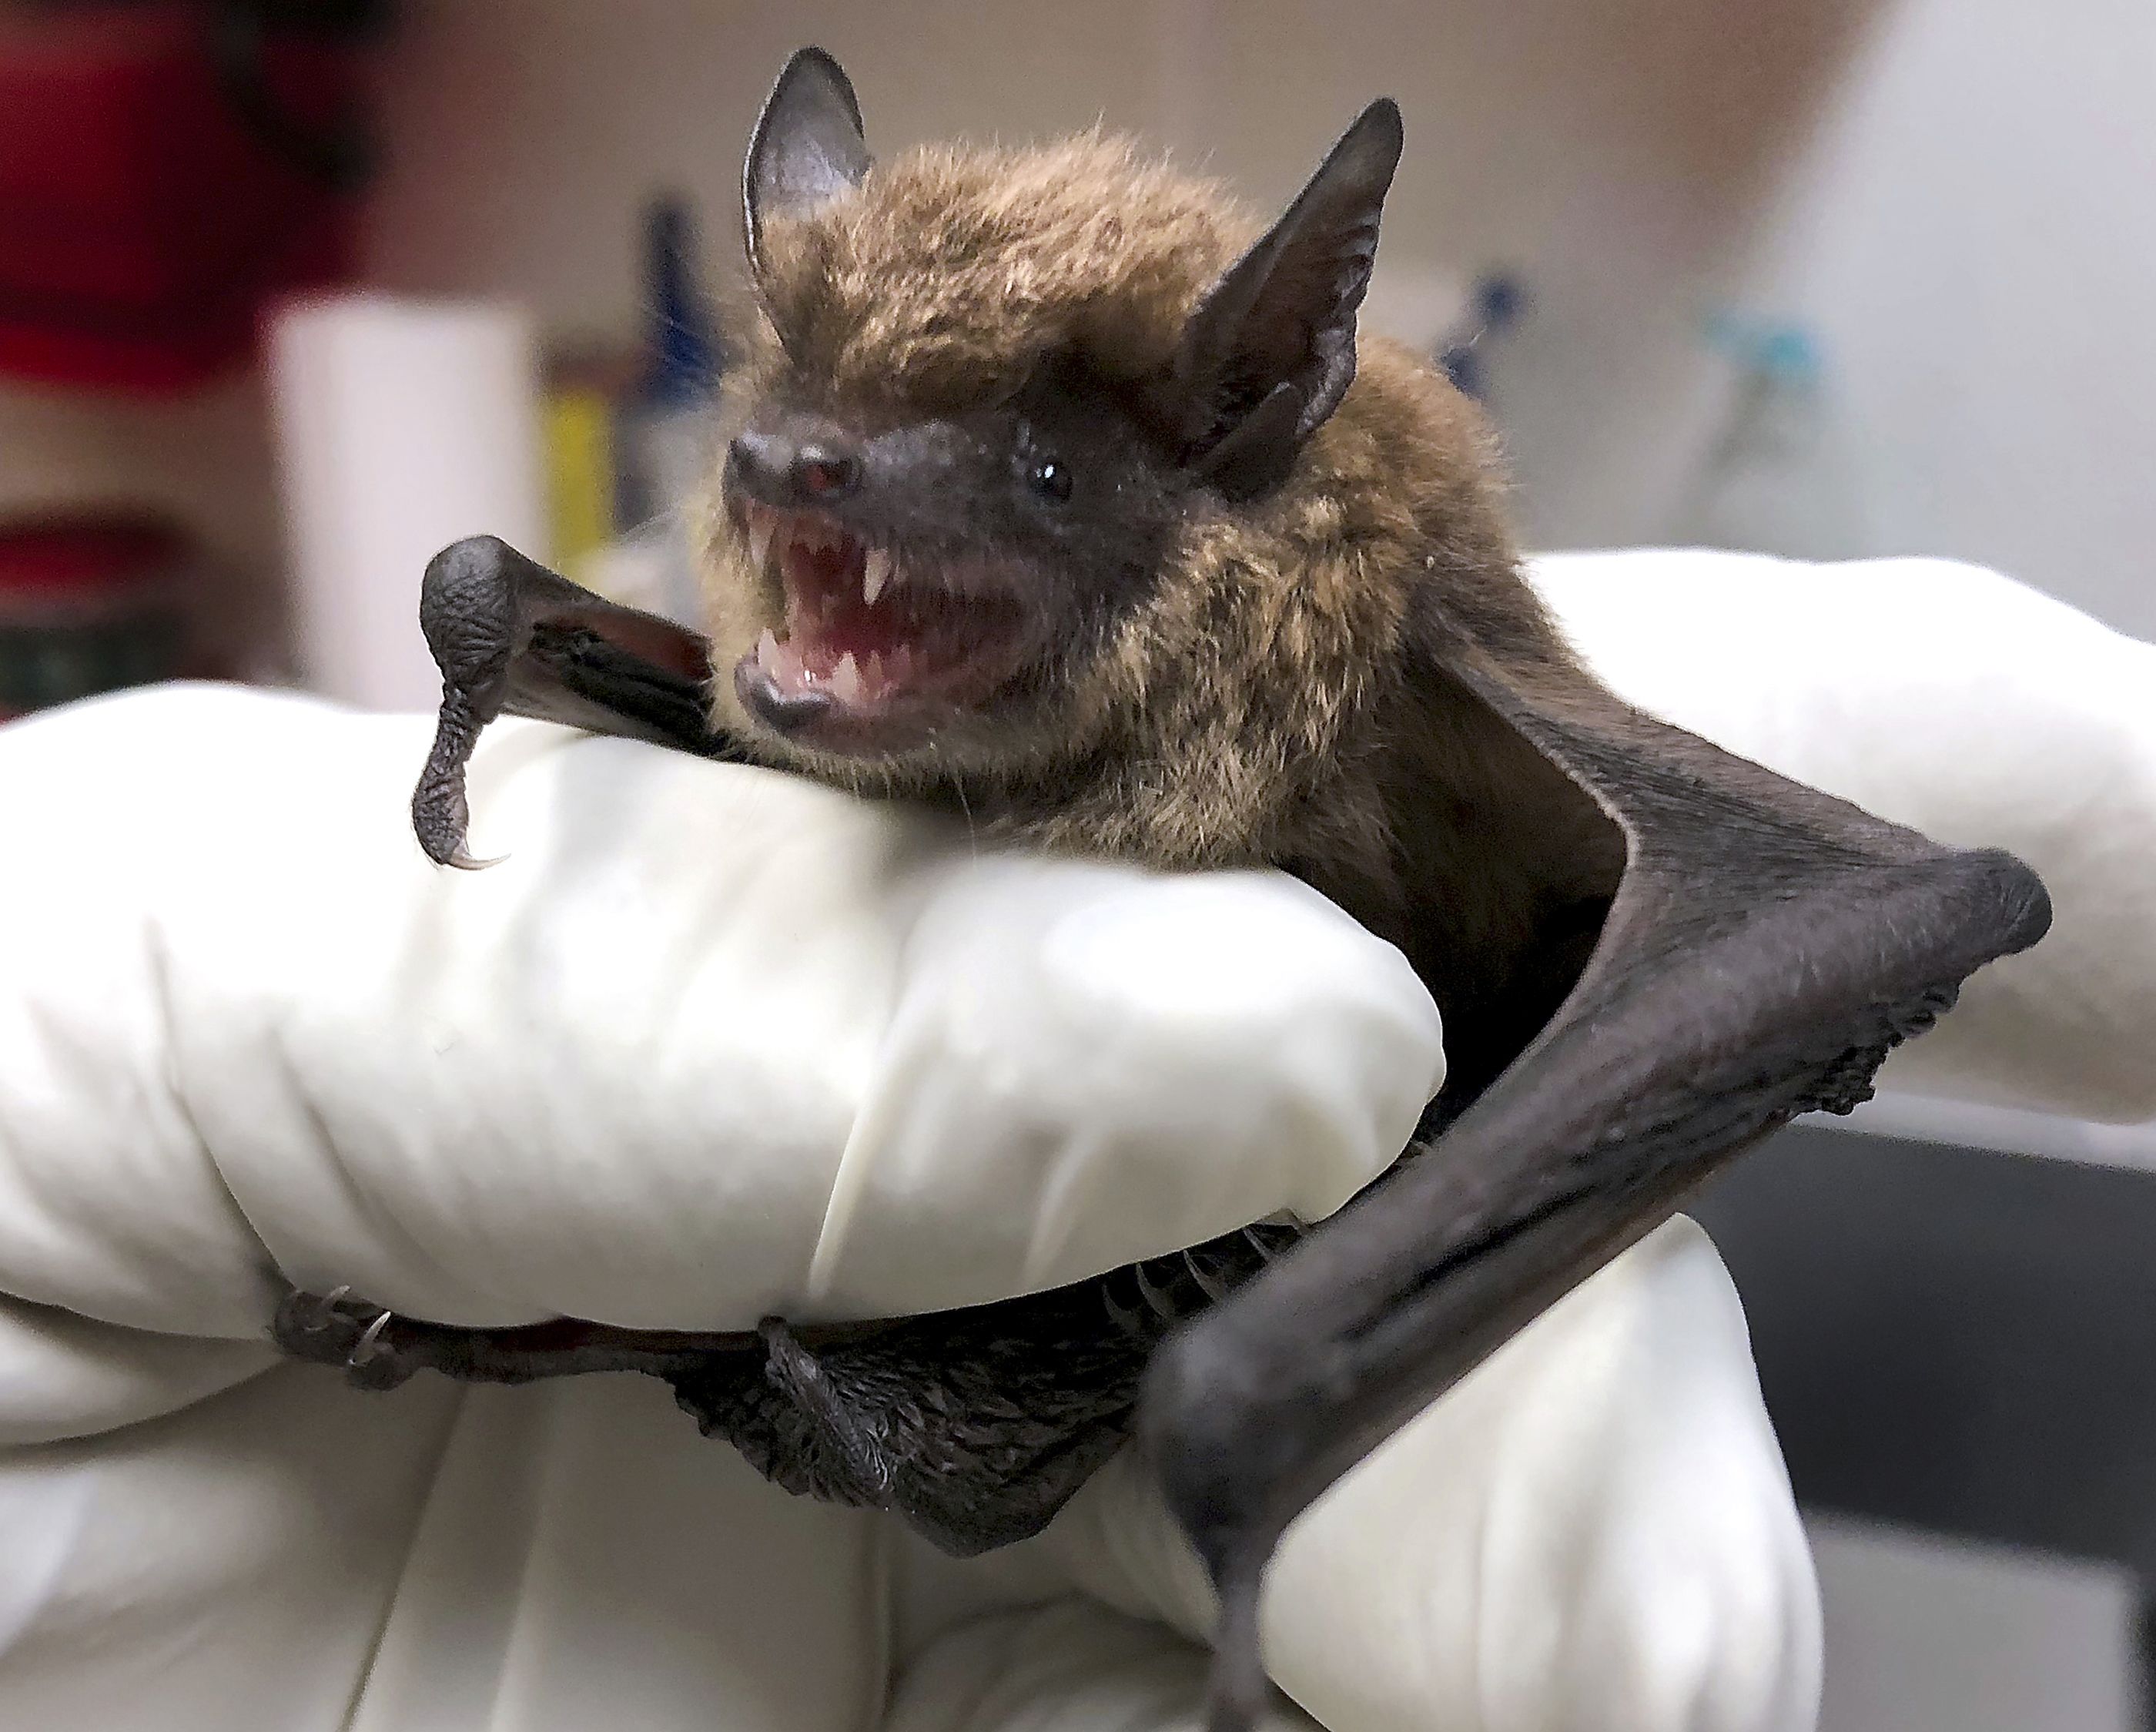 Most rabies infections in the United States come from bats, CDC says | CNN